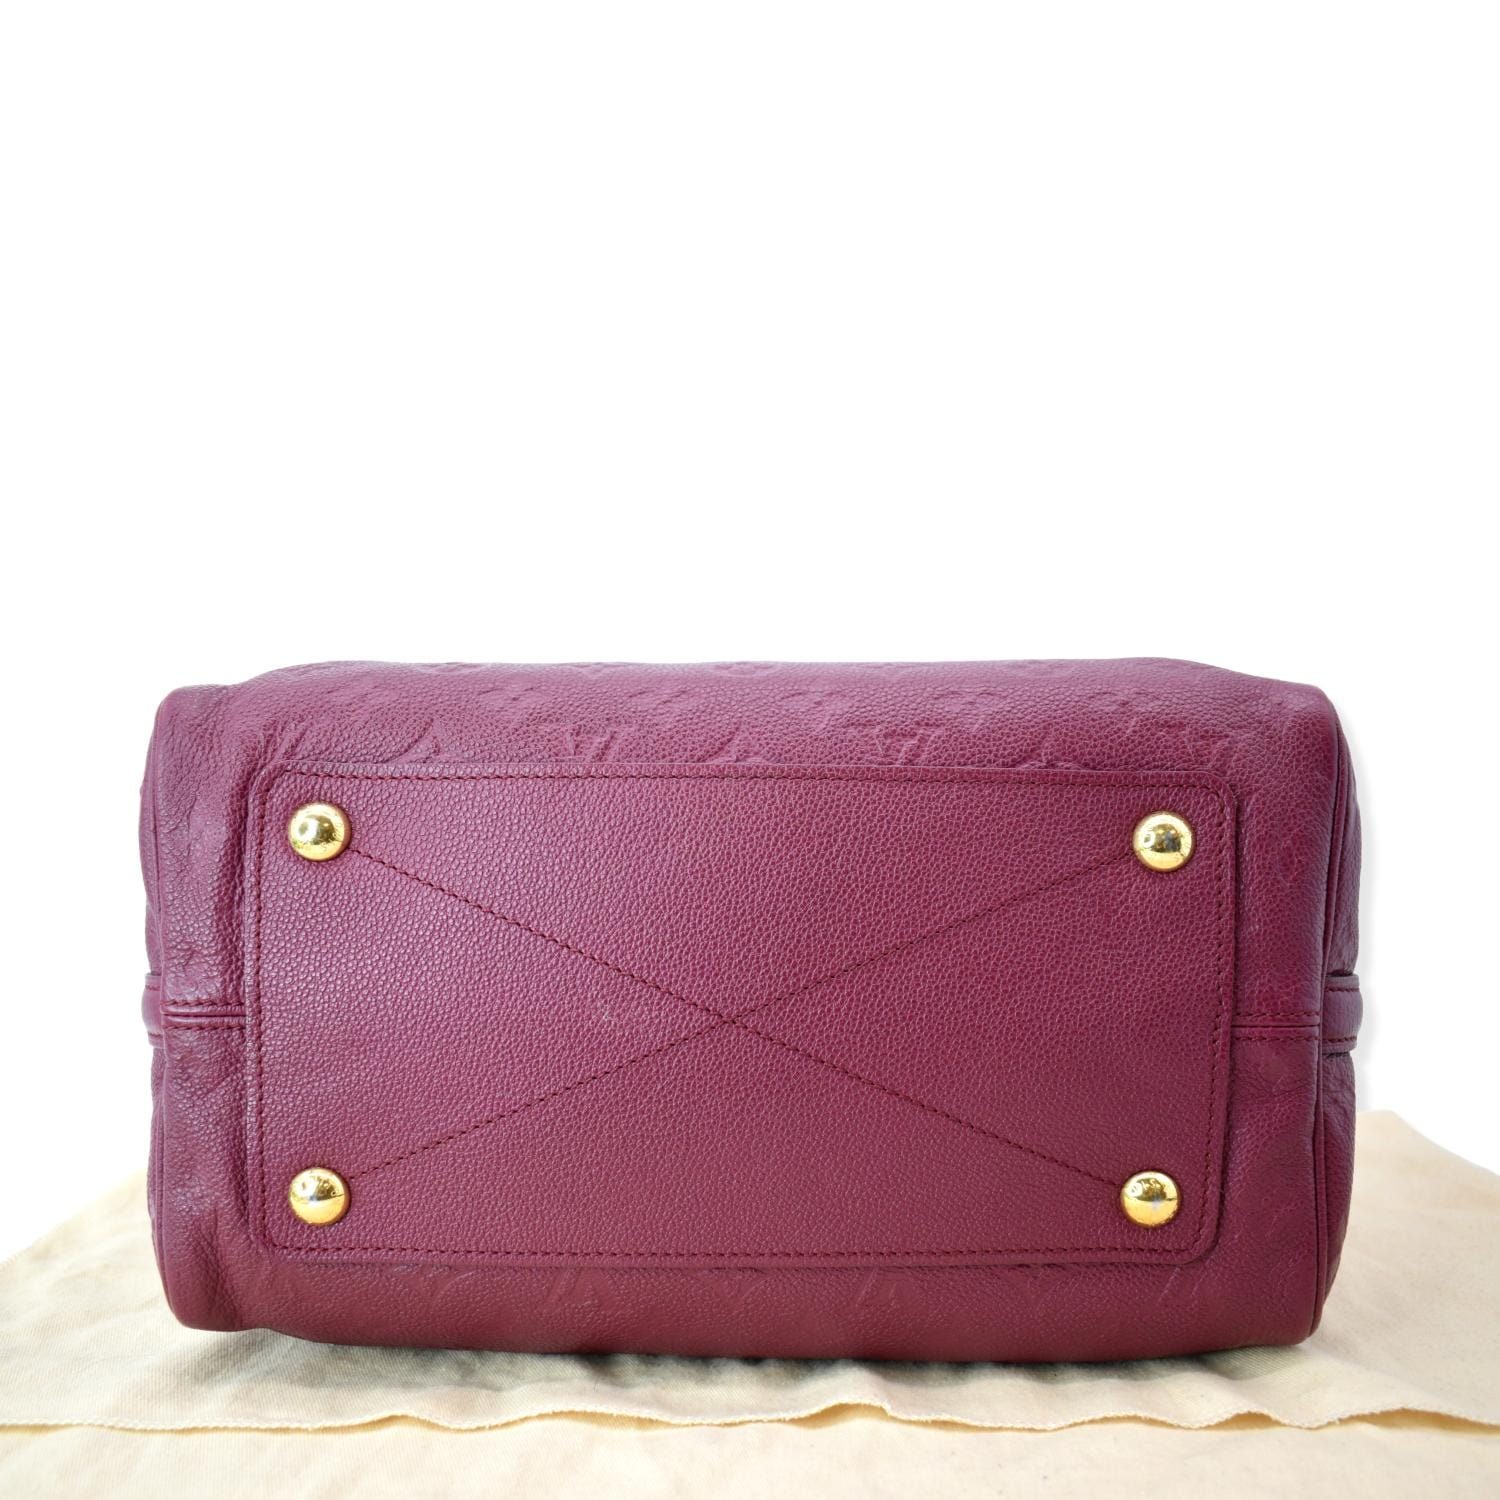 Louis Vuitton Burgundy Wool And Leather Sunshine Express Speedy 30